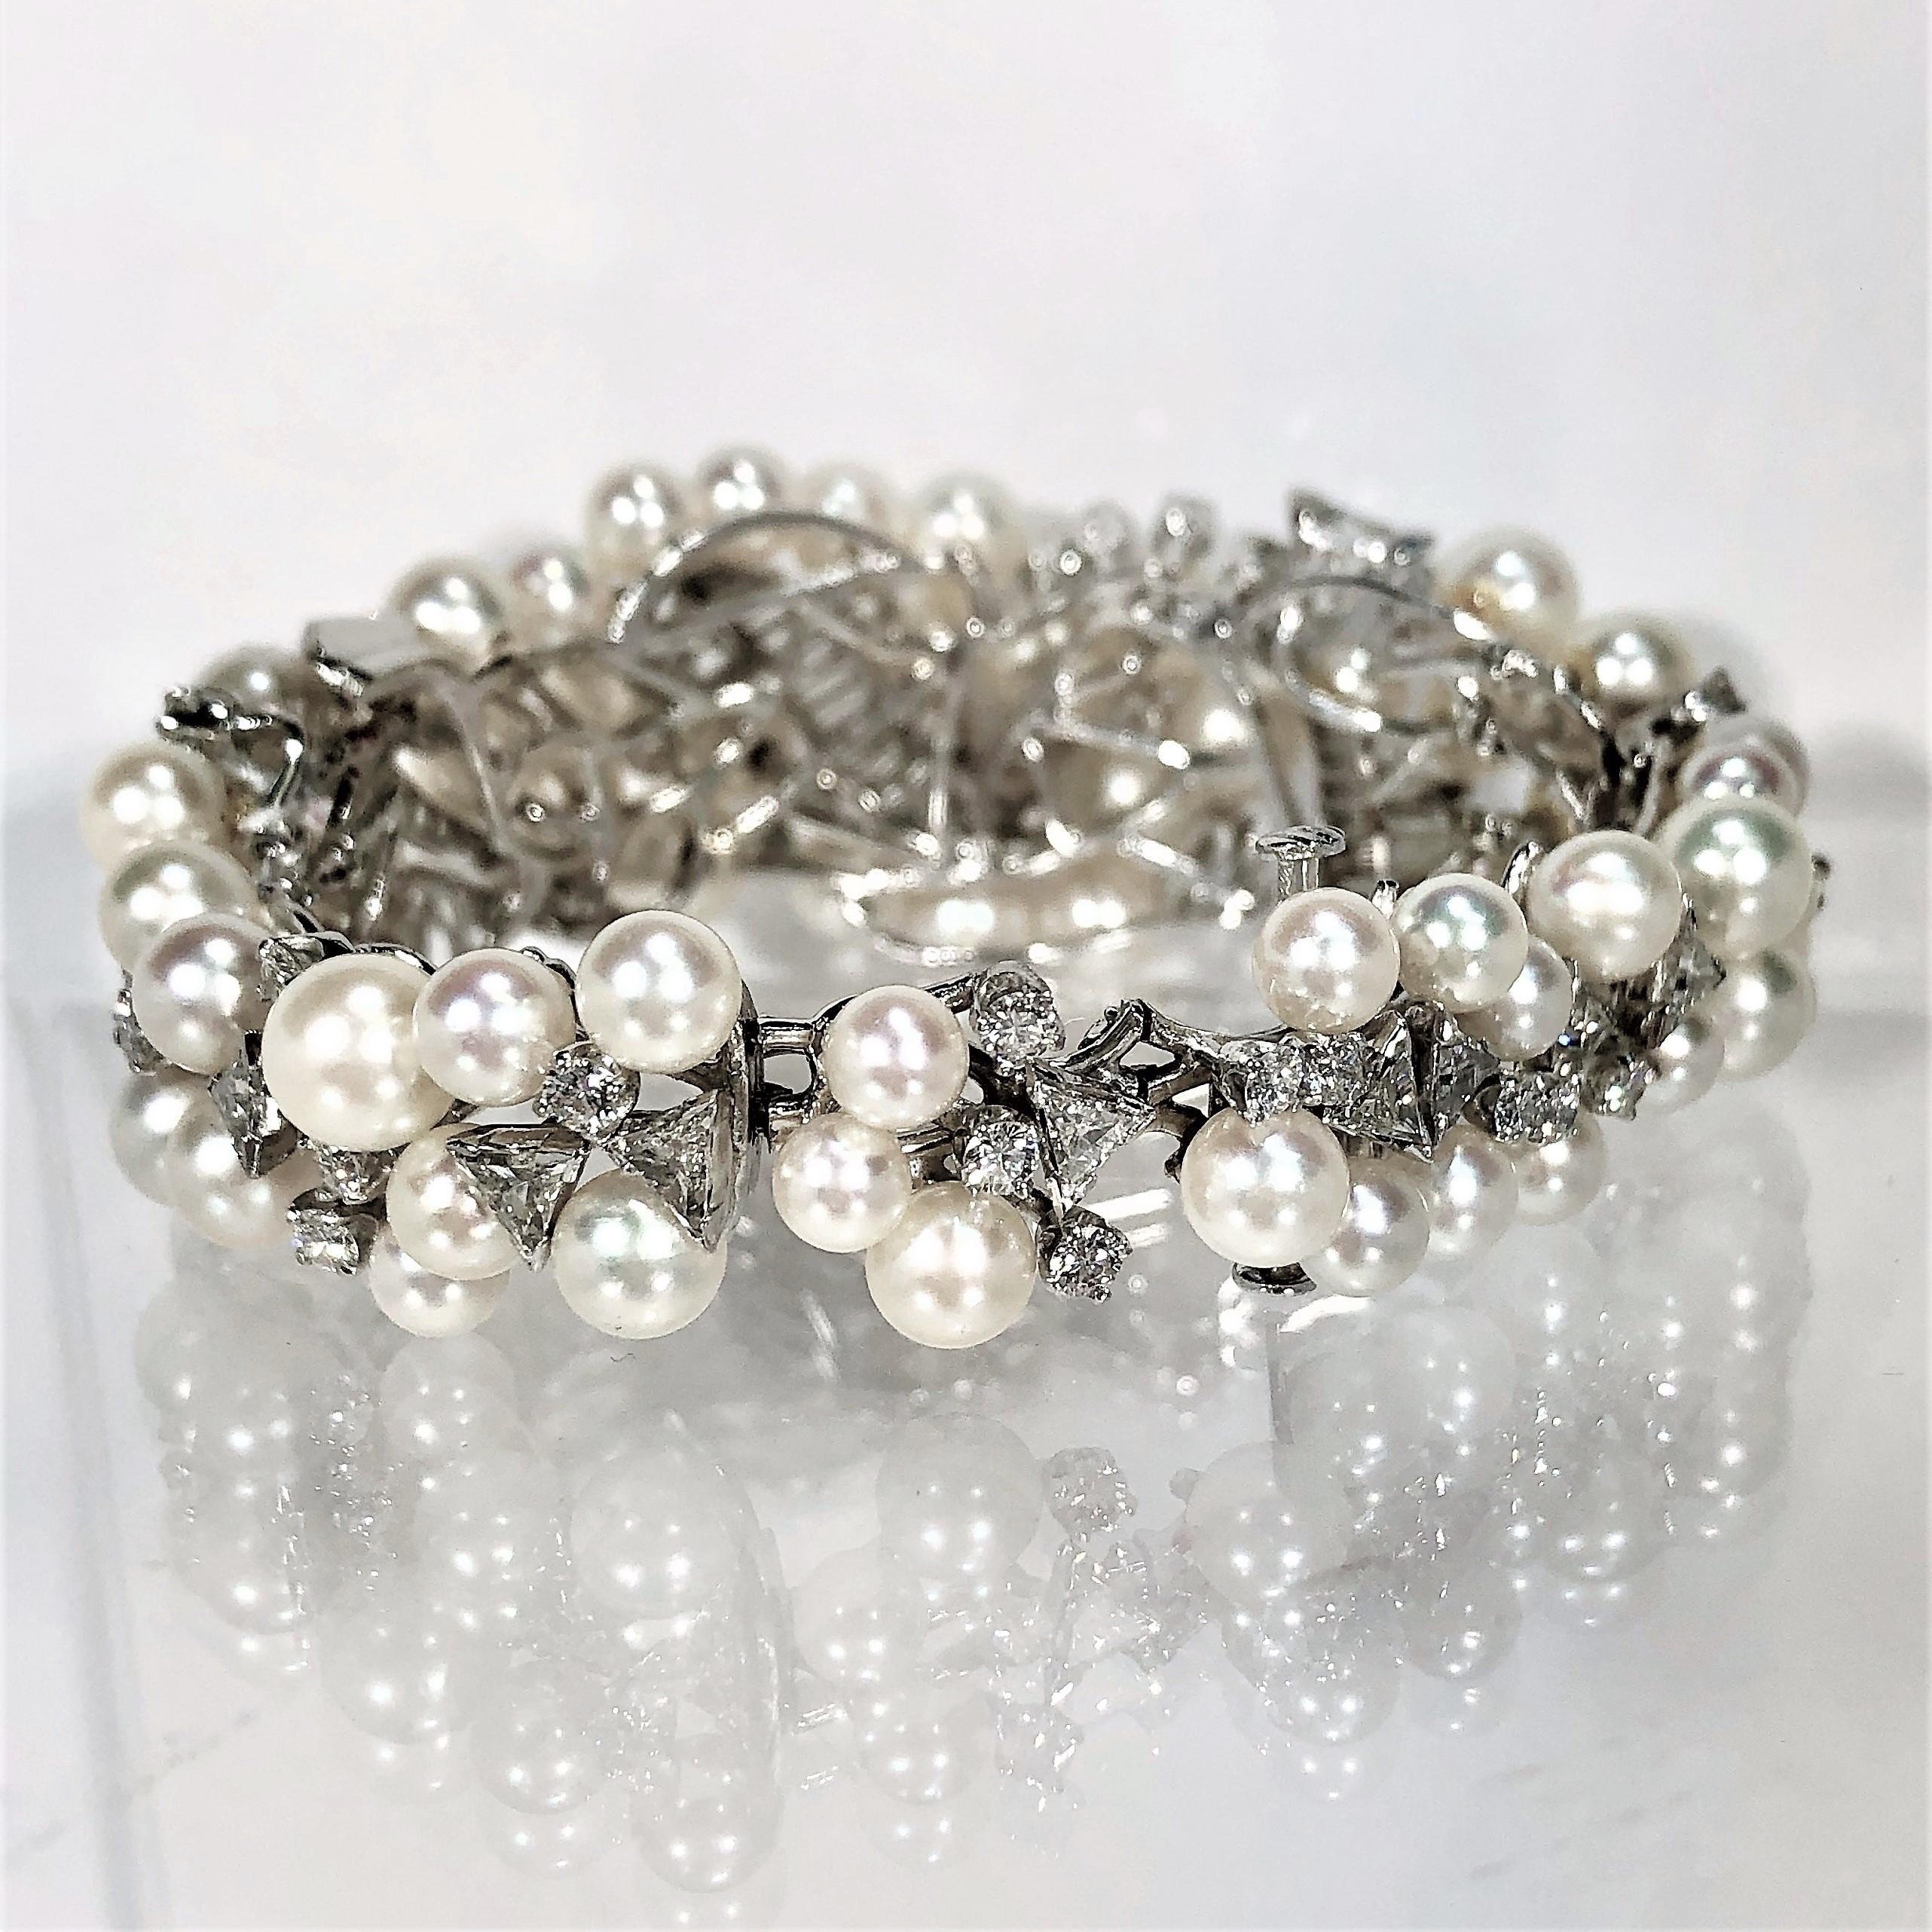 Women's 1950s Graduated Bombee Pearl and Diamond Cocktail Bracelet